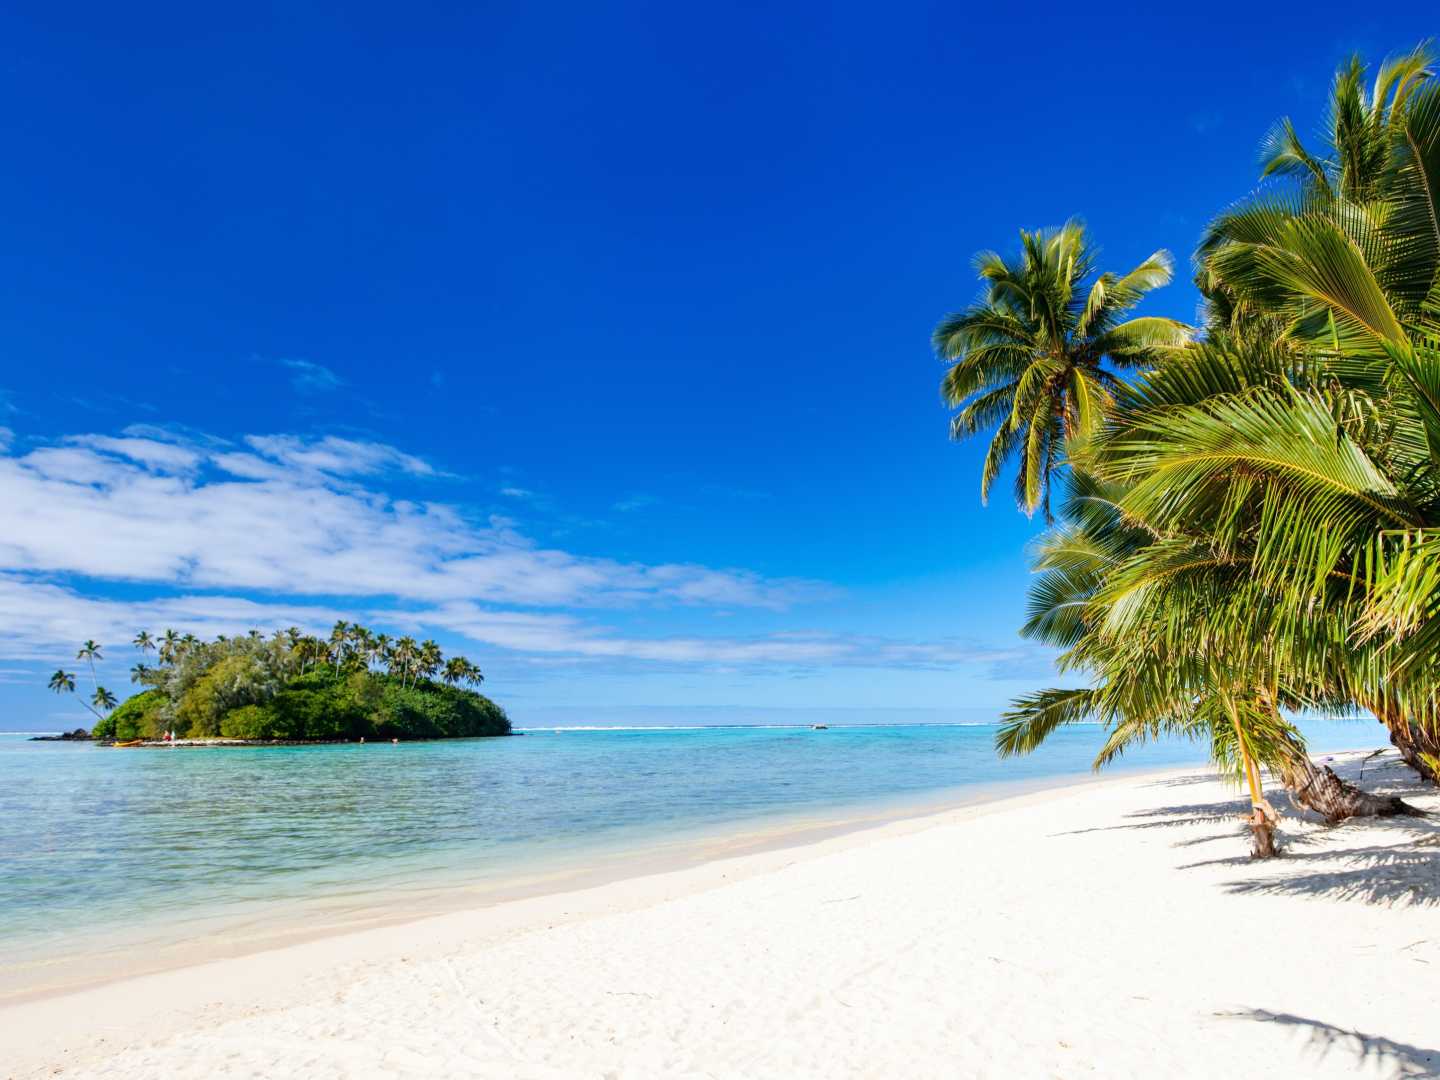 Go on a Cook Islands vacation to see palm trees on white sands of Rarotonga Muri Beach Lagune.